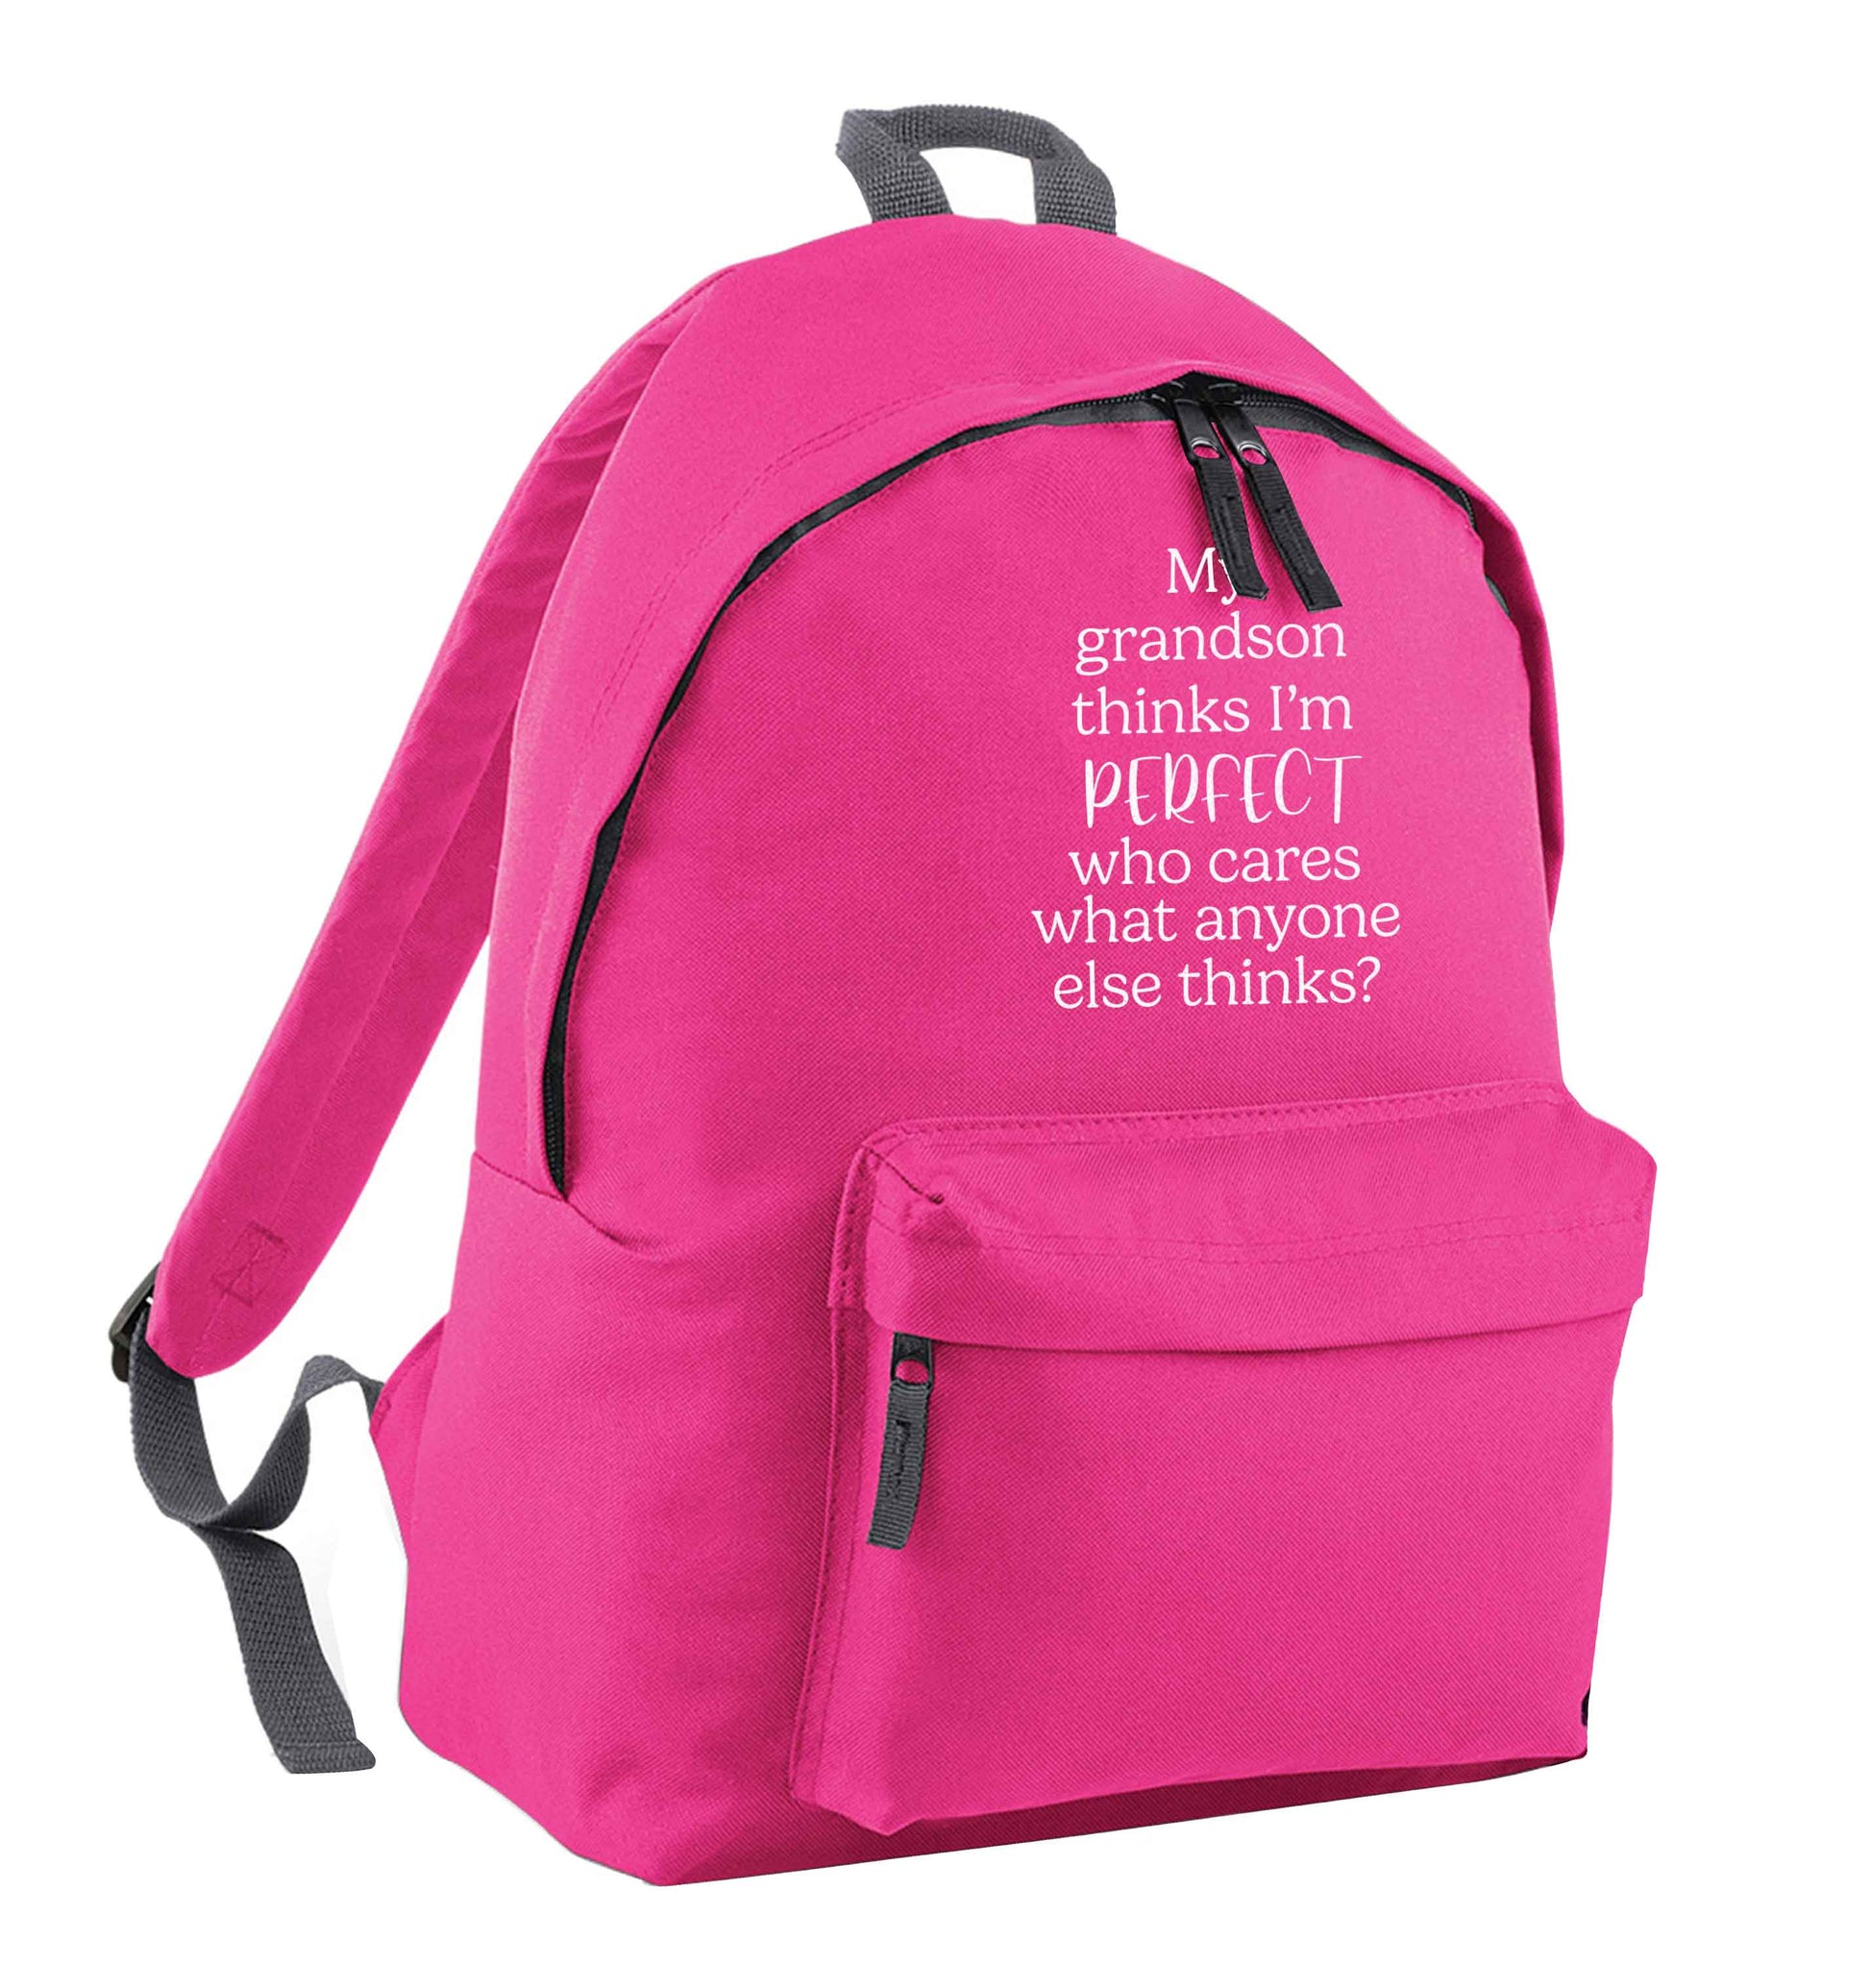 My grandson thinks I'm perfect pink adults backpack